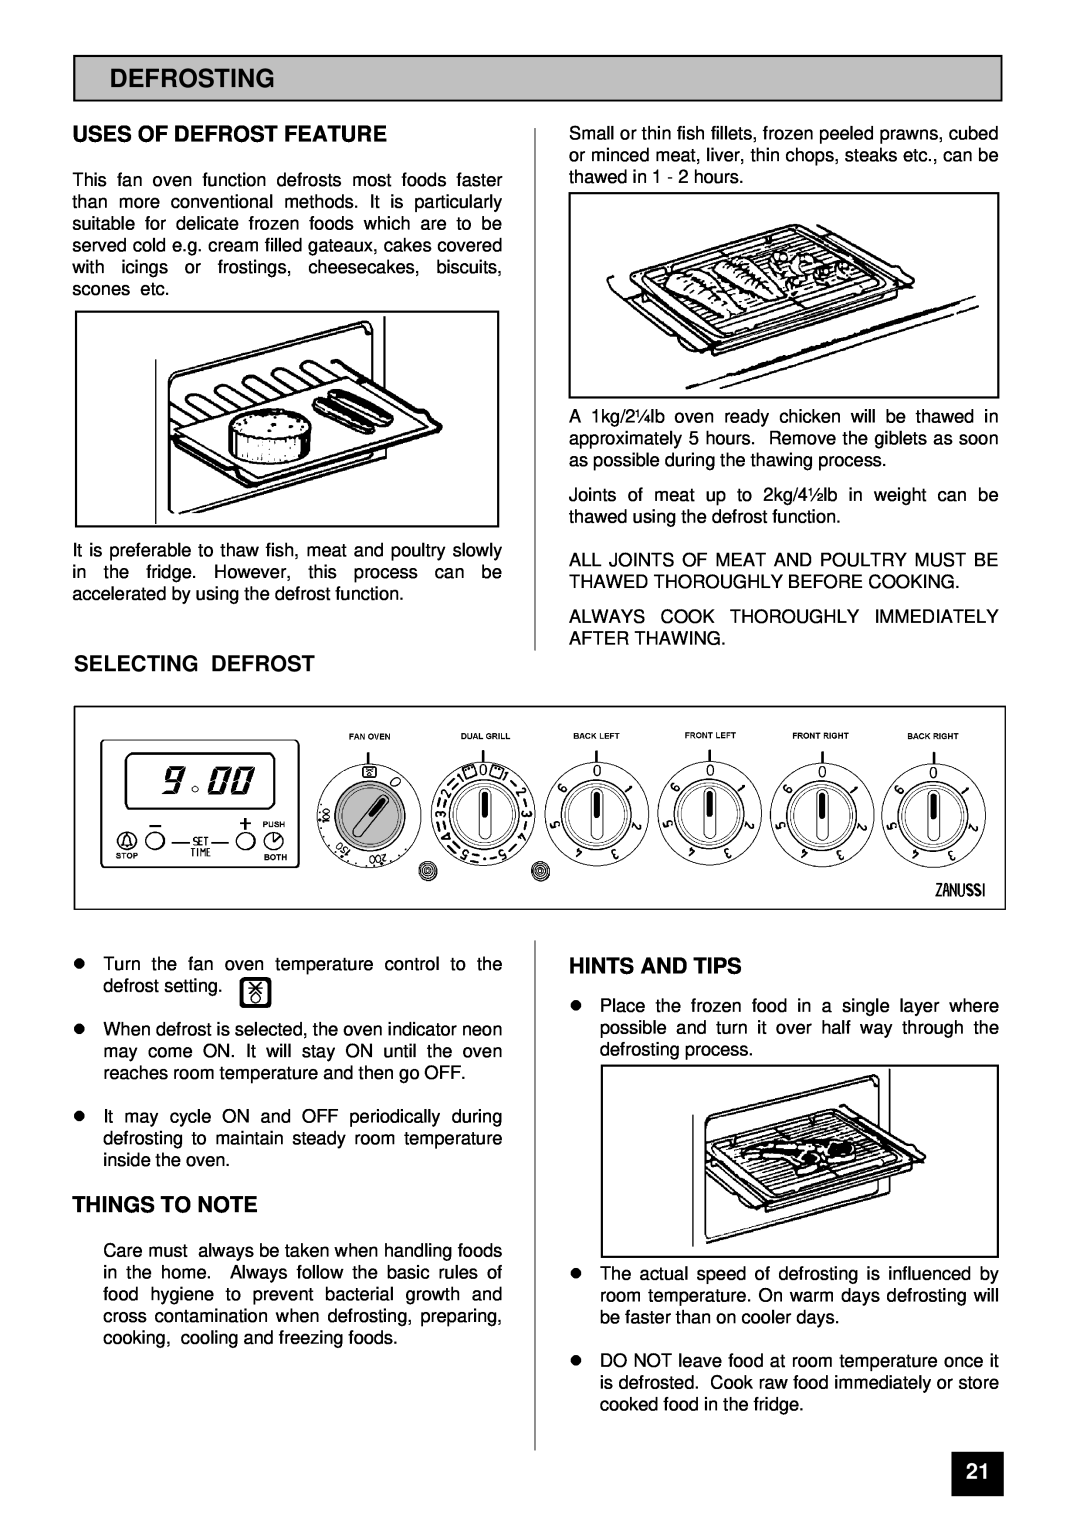 Zanussi ZCE 7350 manual Defrosting, Uses Of Defrost Feature, Selecting Defrost, Things To Note, lHINTS AND TIPS 